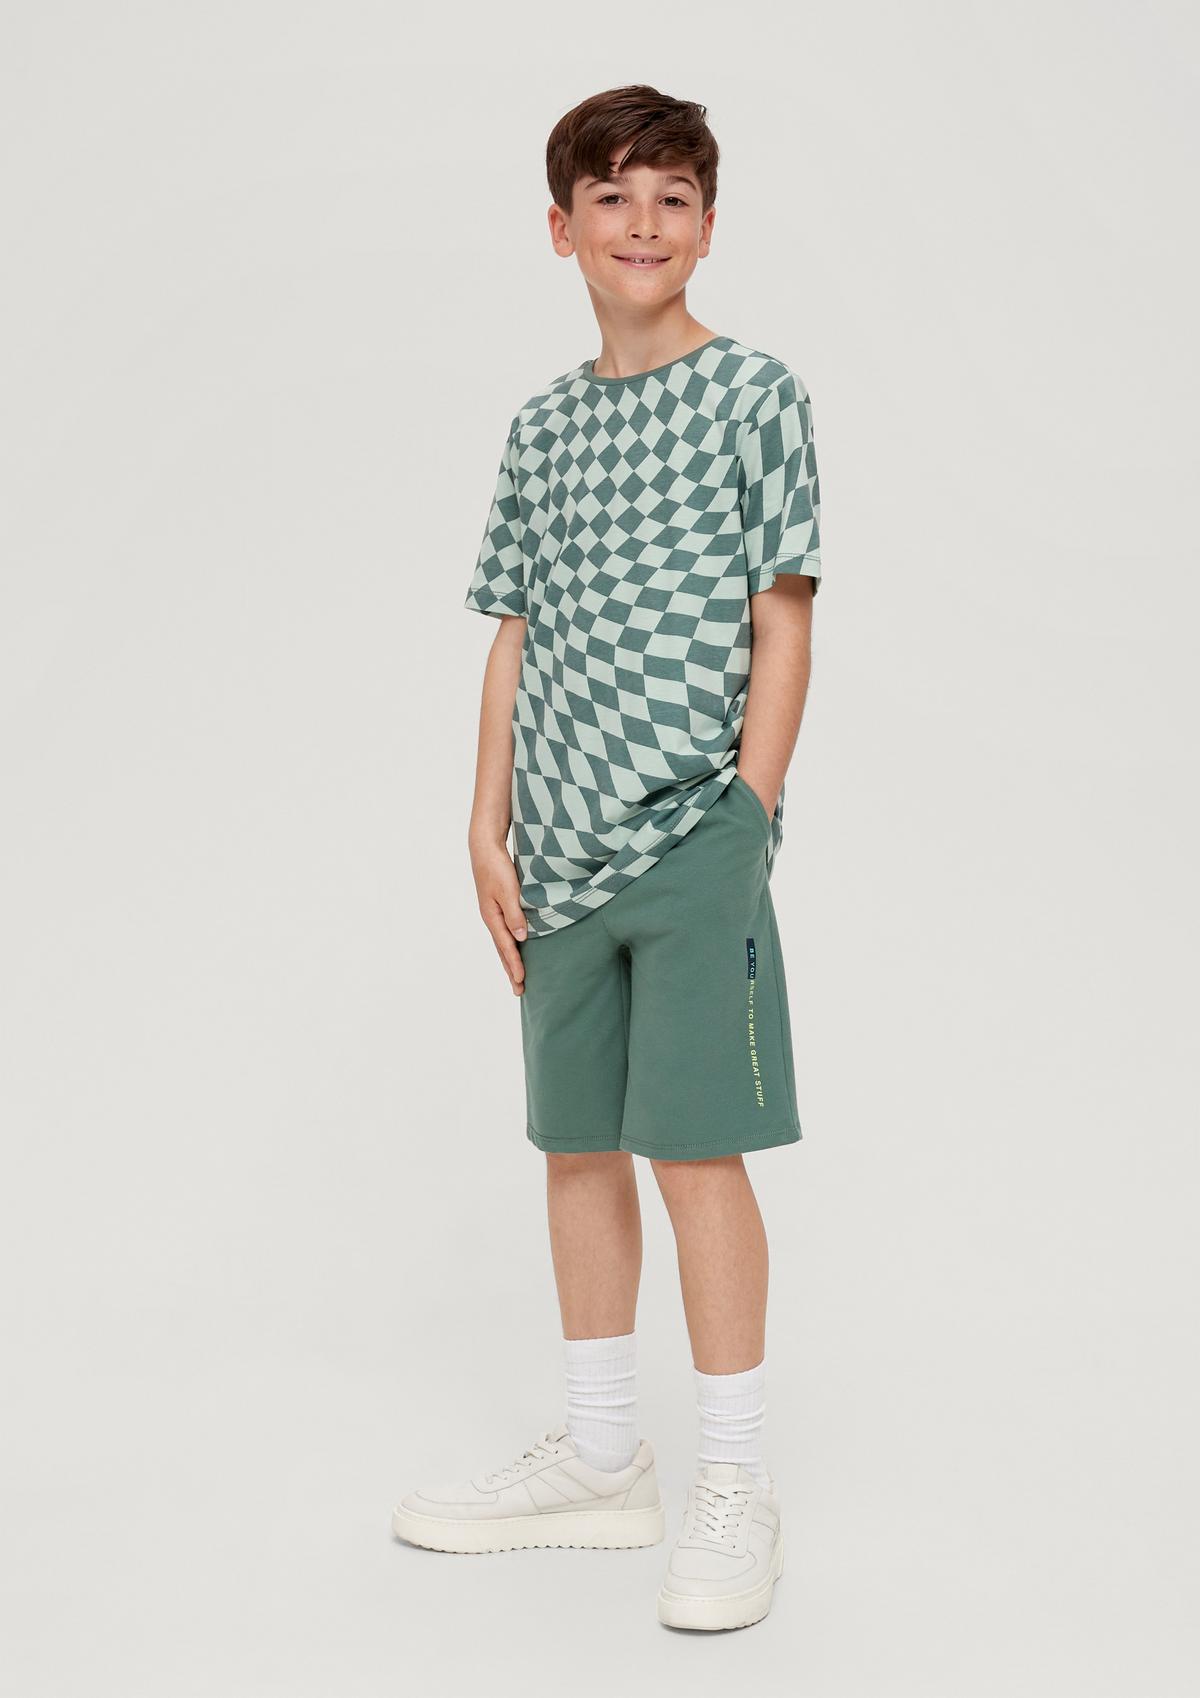 for boys online teens shorts Bermuda Find and